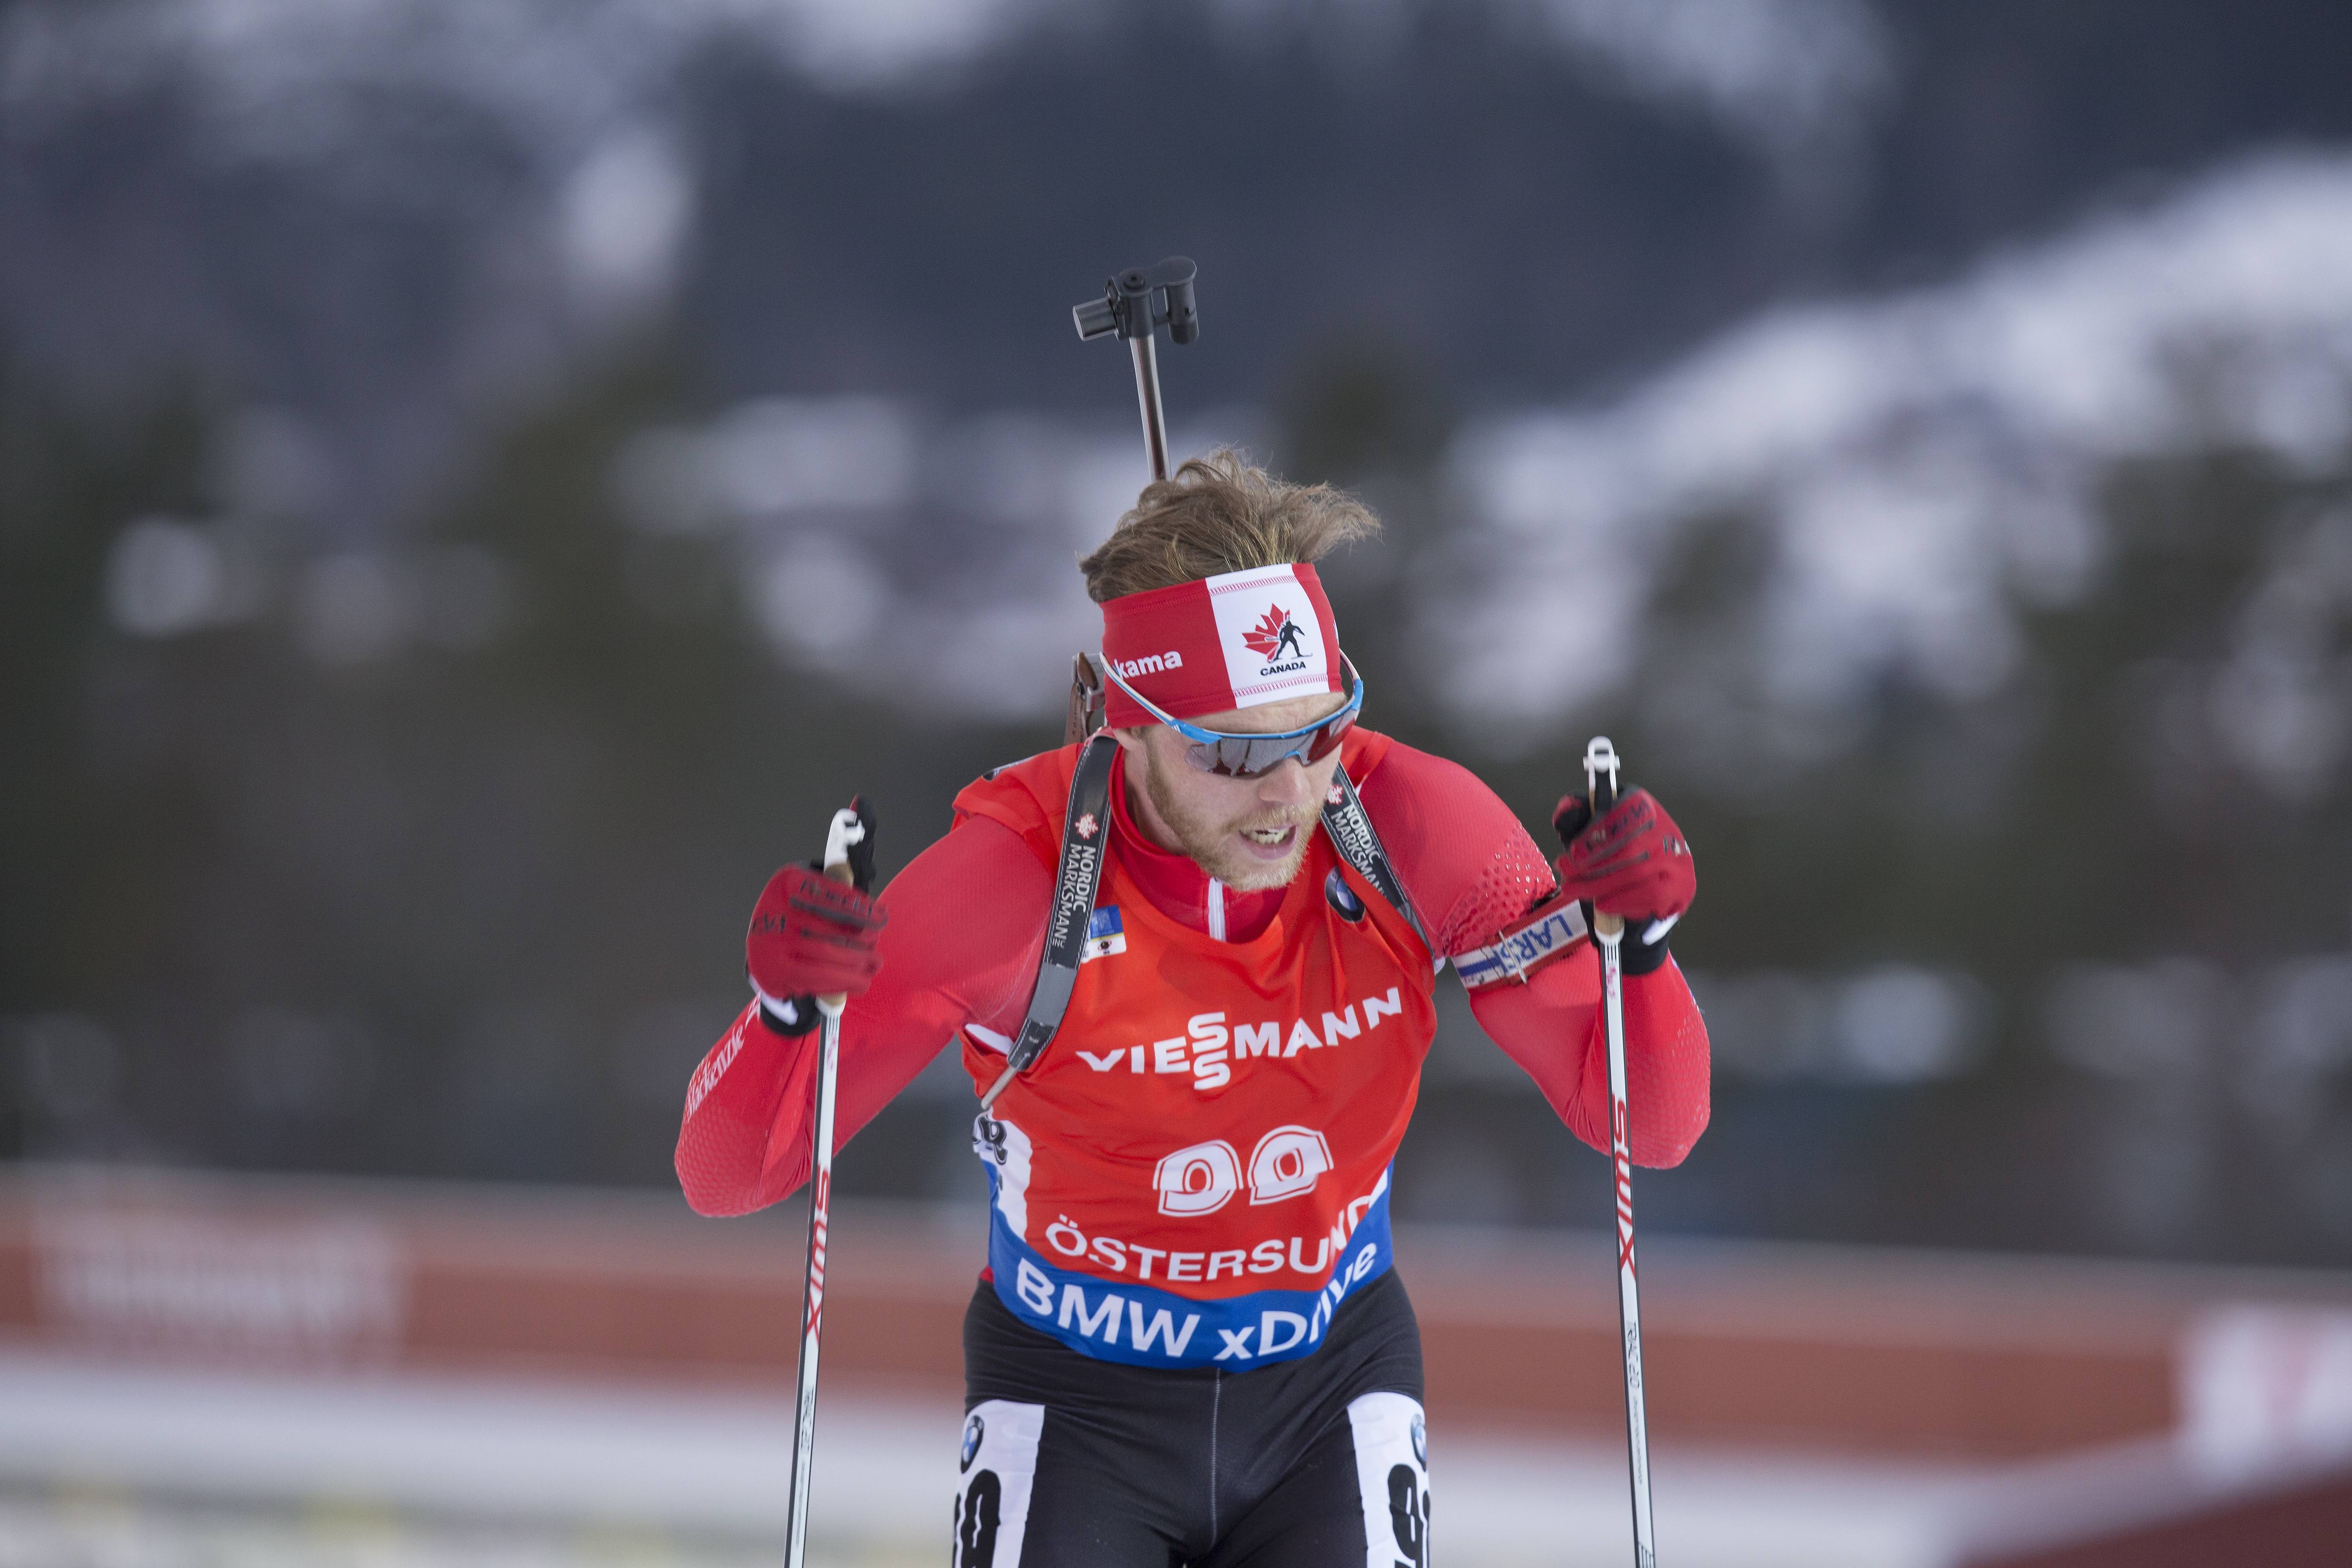 Canada’s Smith 9th, Macx Davies Stuns in 10th in Östersund Sprint